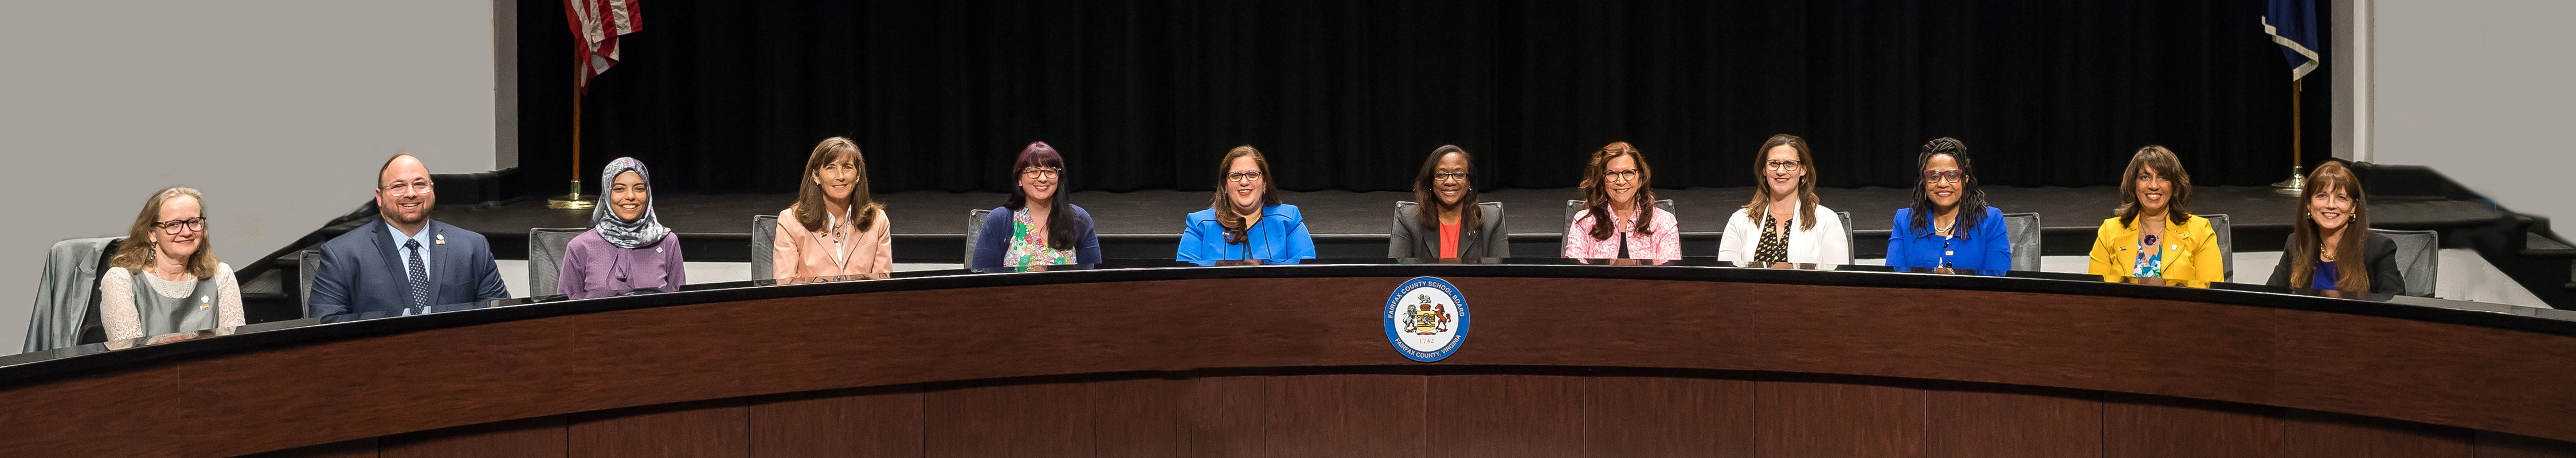 School board members on the dais at Jackson Middle School